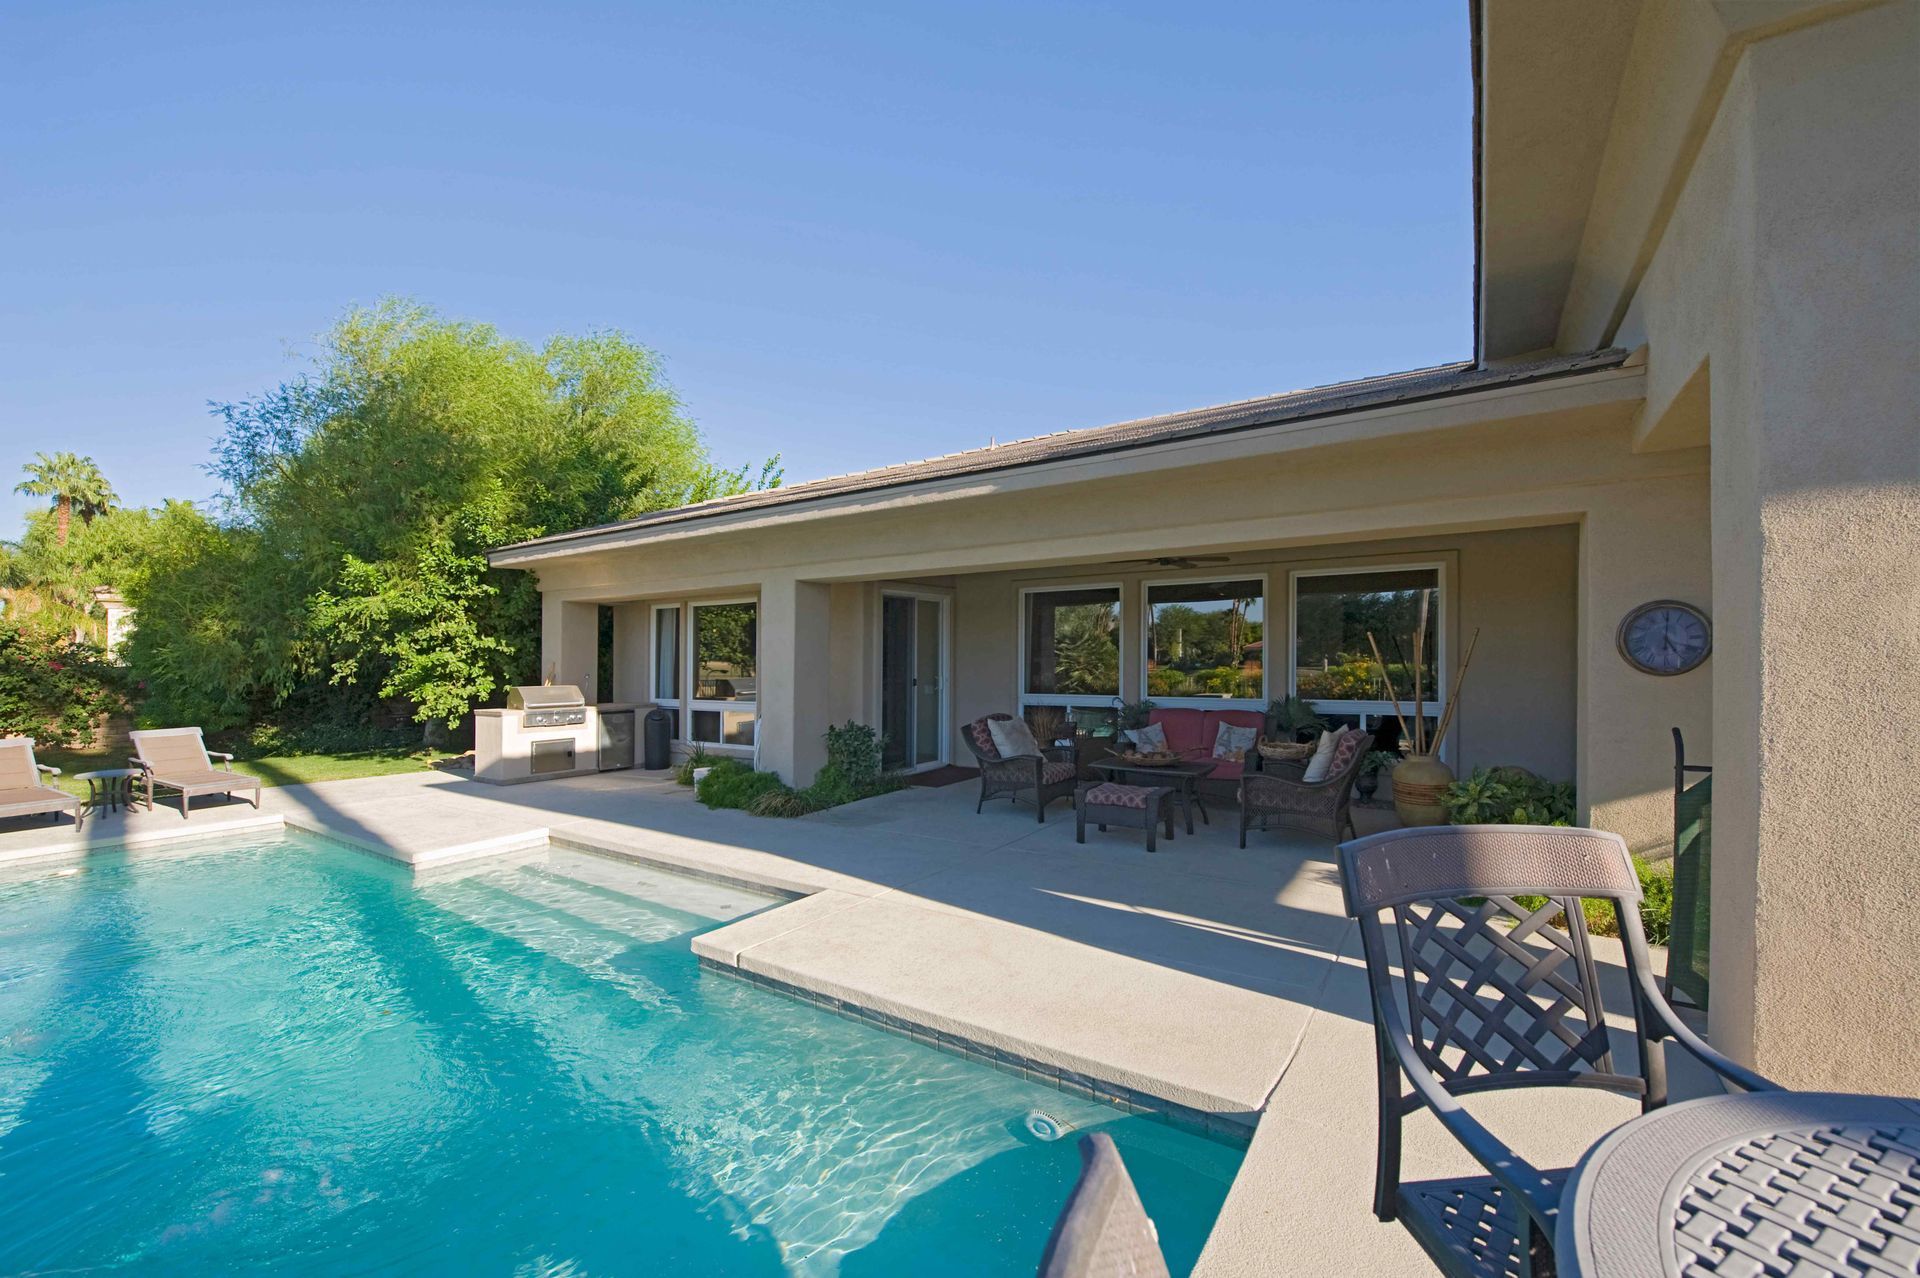 Custom pool installation by Placer County Pool Contractors in Roseville, California